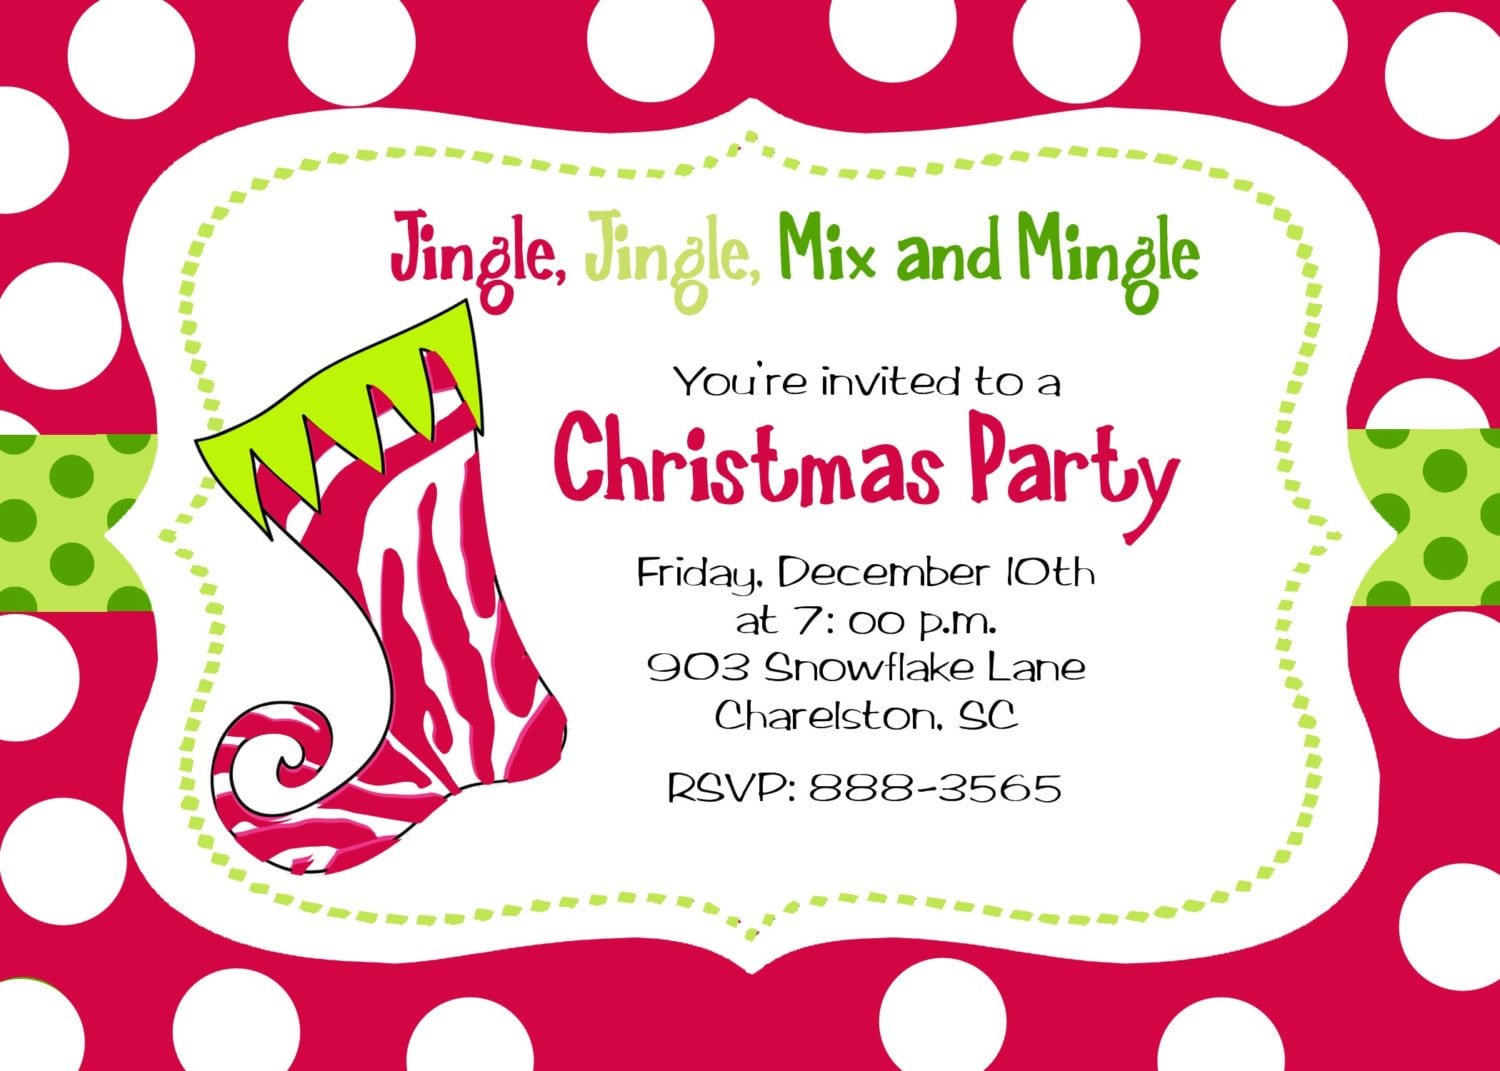 Christmas Party Invite Template from www.itbof.com